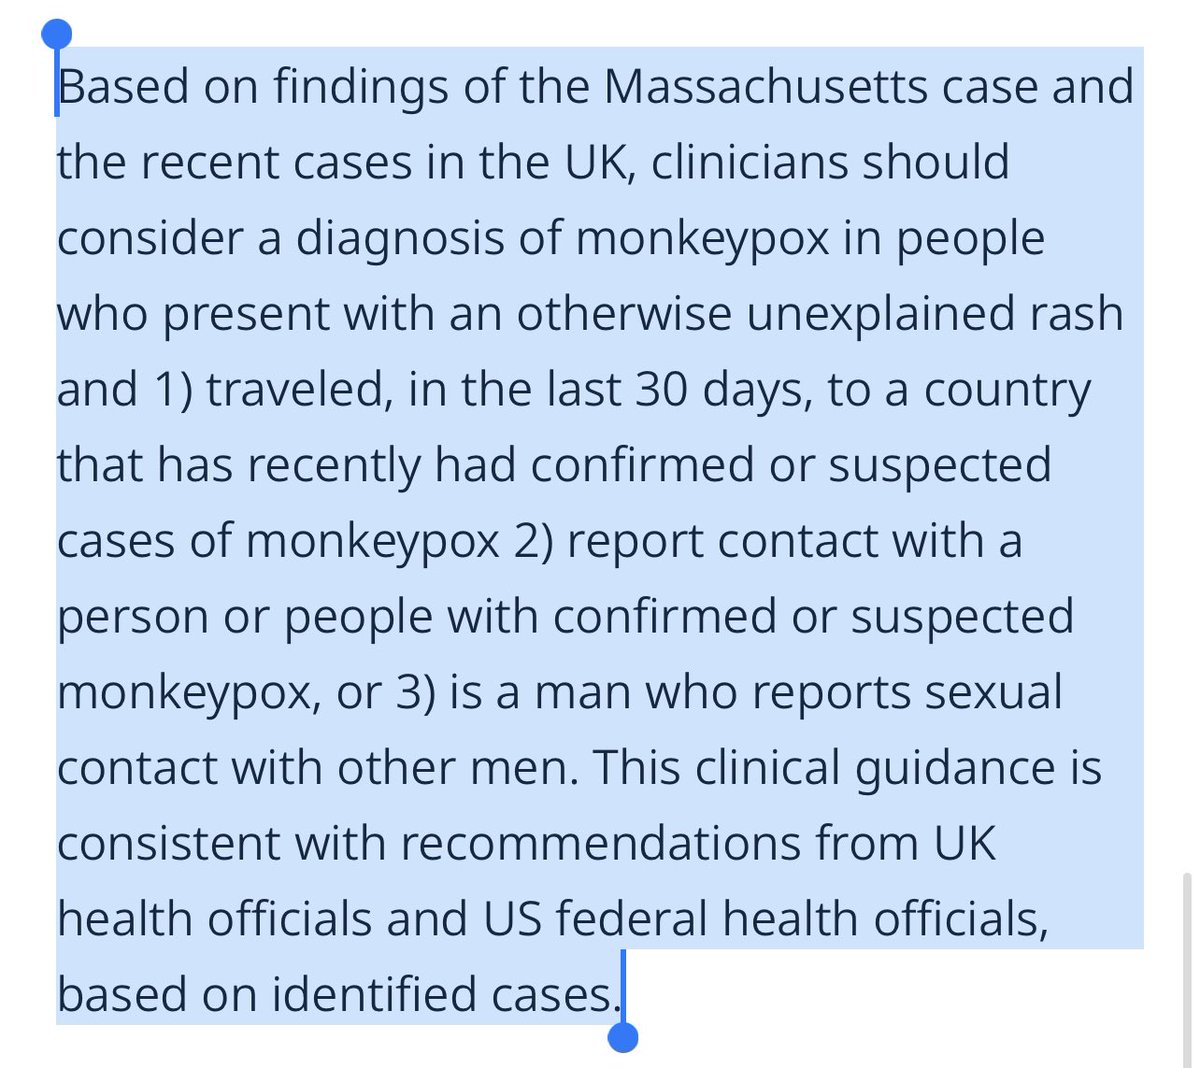 4) Based on findings of case and recent cases in the UK, clinicians should consider a diagnosis of monkeypox in people who present with an otherwise unexplained rash and 1) traveled, in the last 30 days, to a country that has recently had suspected cases… https://www.mass.gov/news/massachusetts-public-health-officials-confirm-case-of-monkeypox